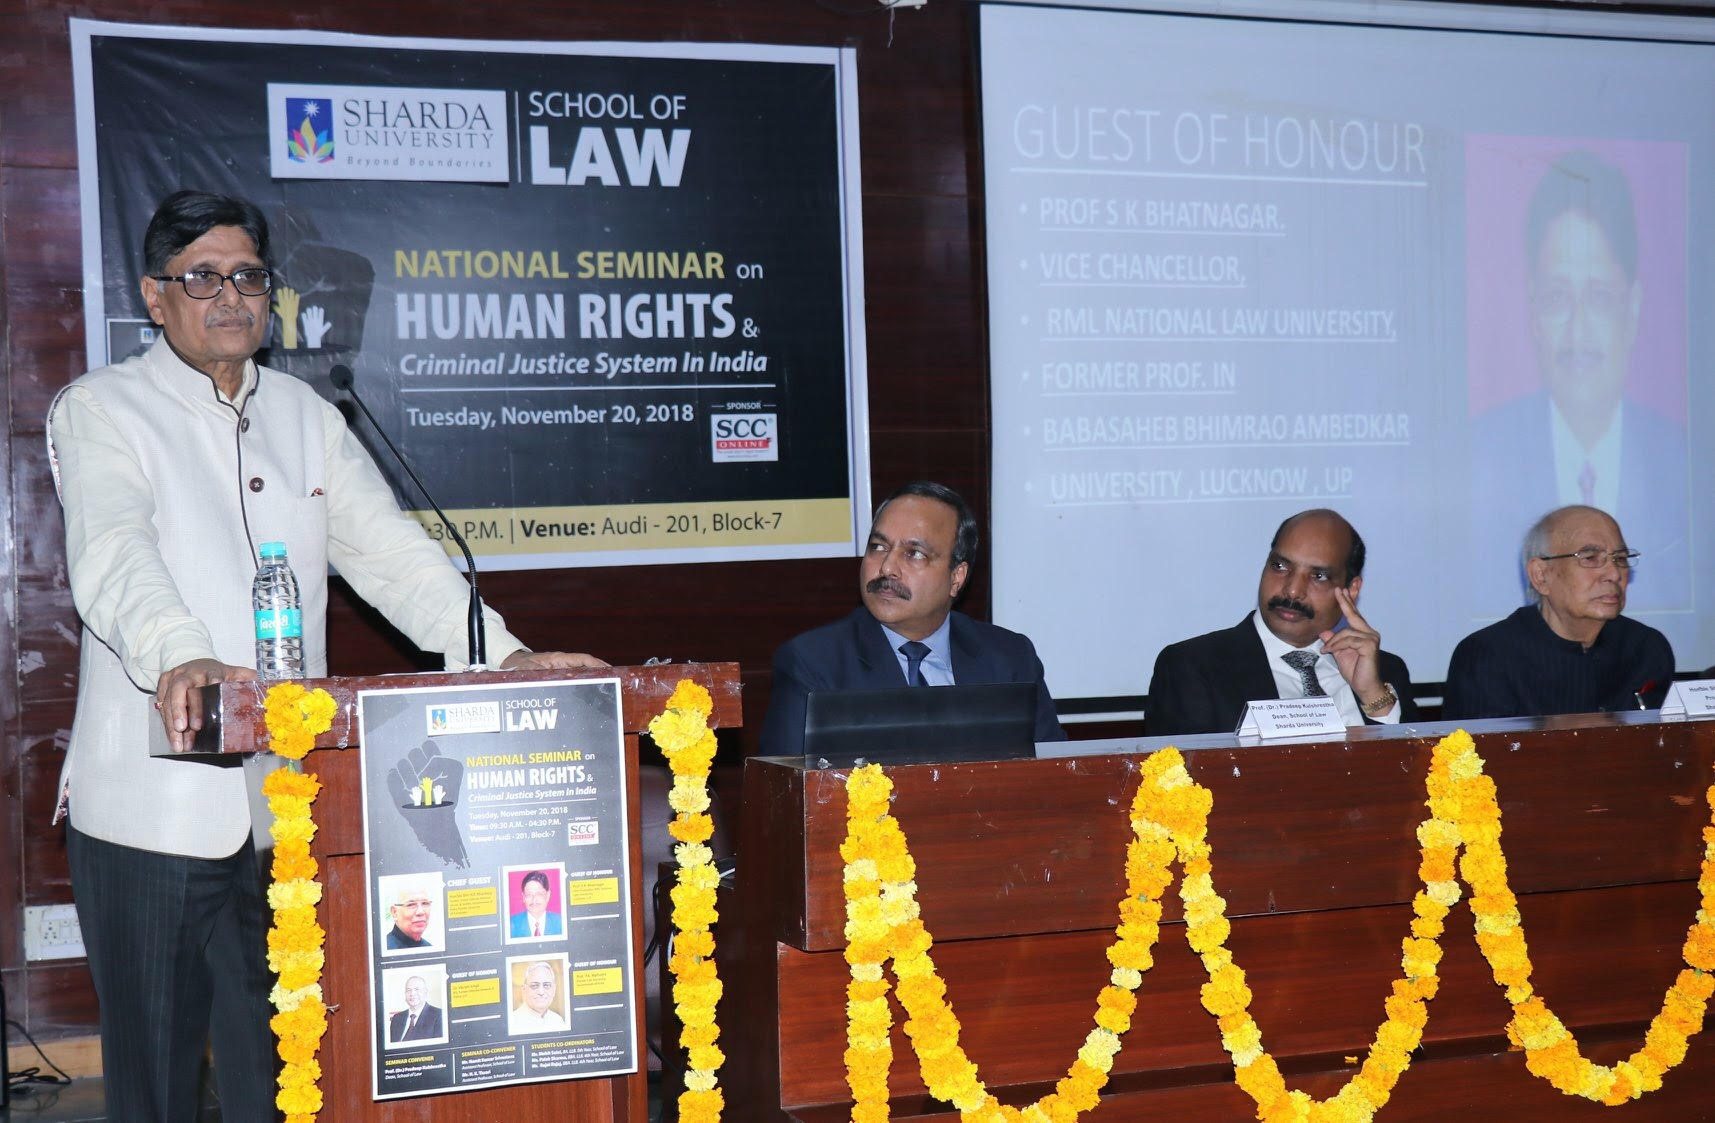 National Seminar on Human Rights and Criminal Justice System in India